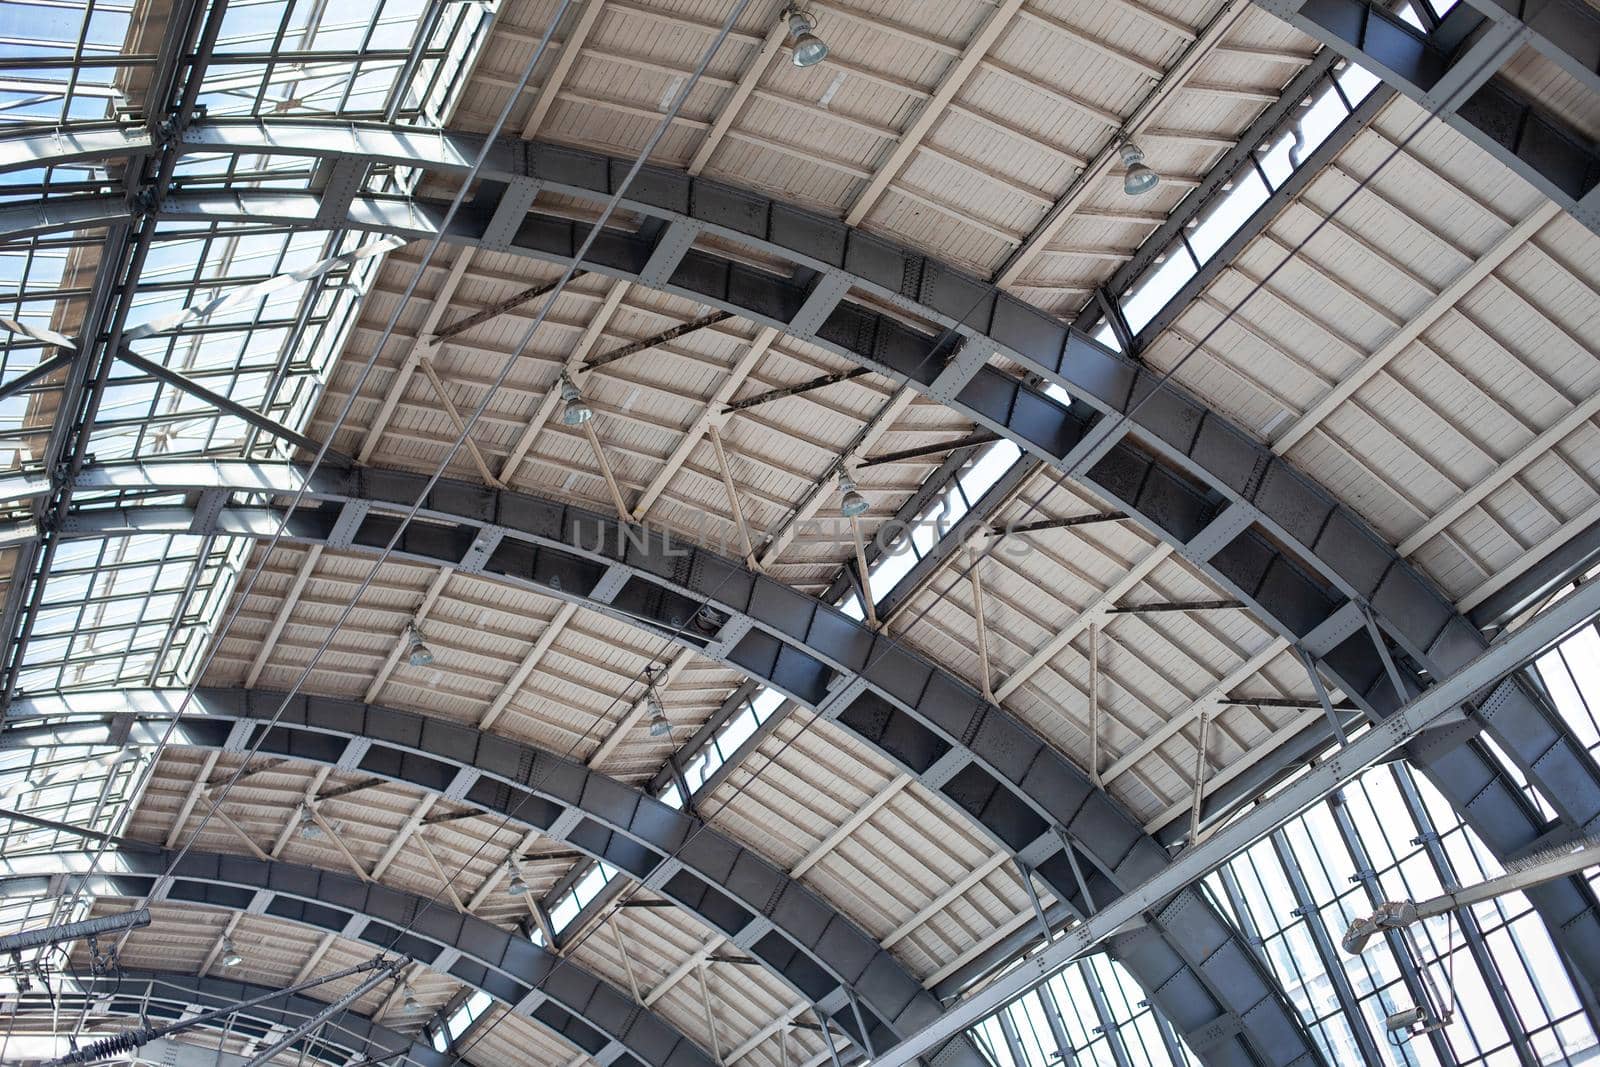 Ceiling of a railway station in Berlin